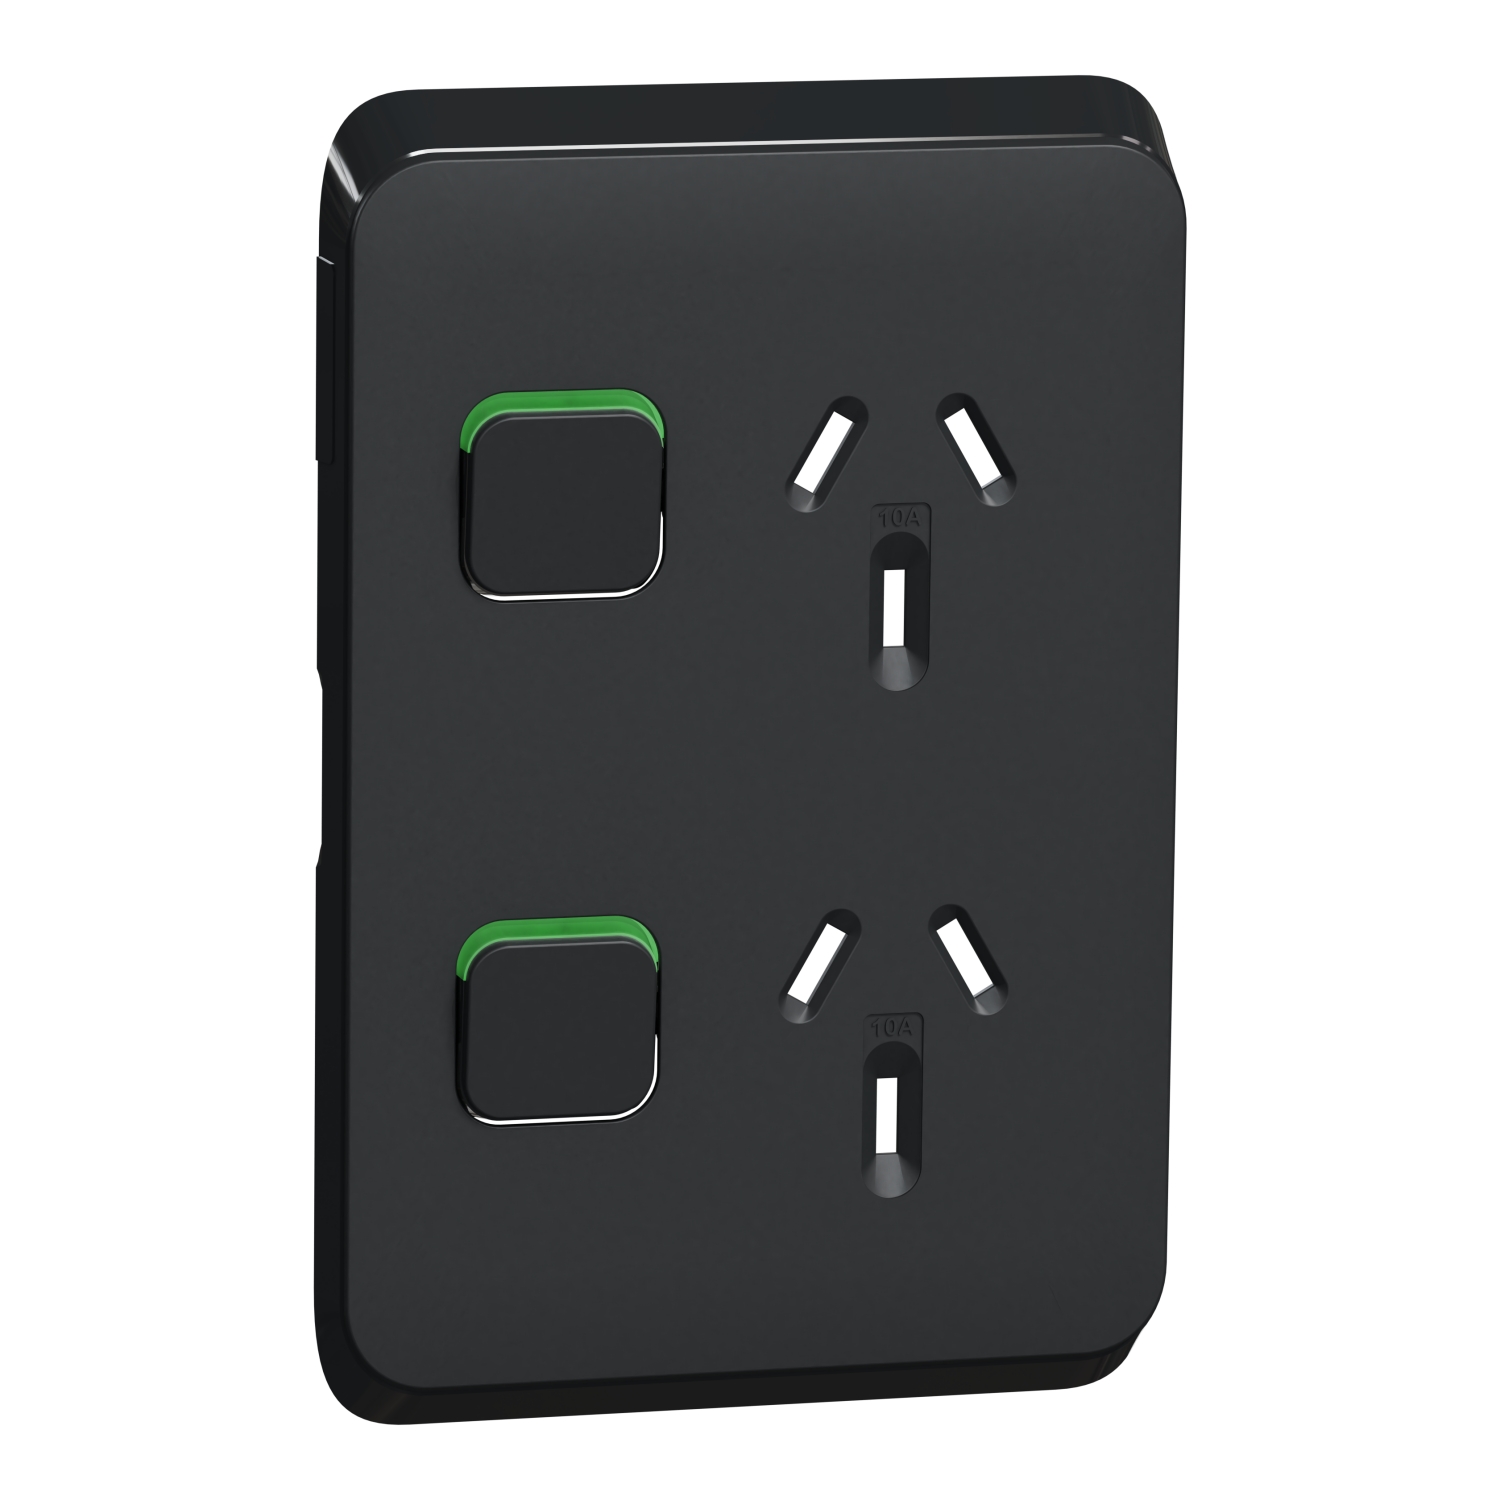 PDL Iconic - Cover Plate Double Switched Socket 10A Vertical - Solid Black